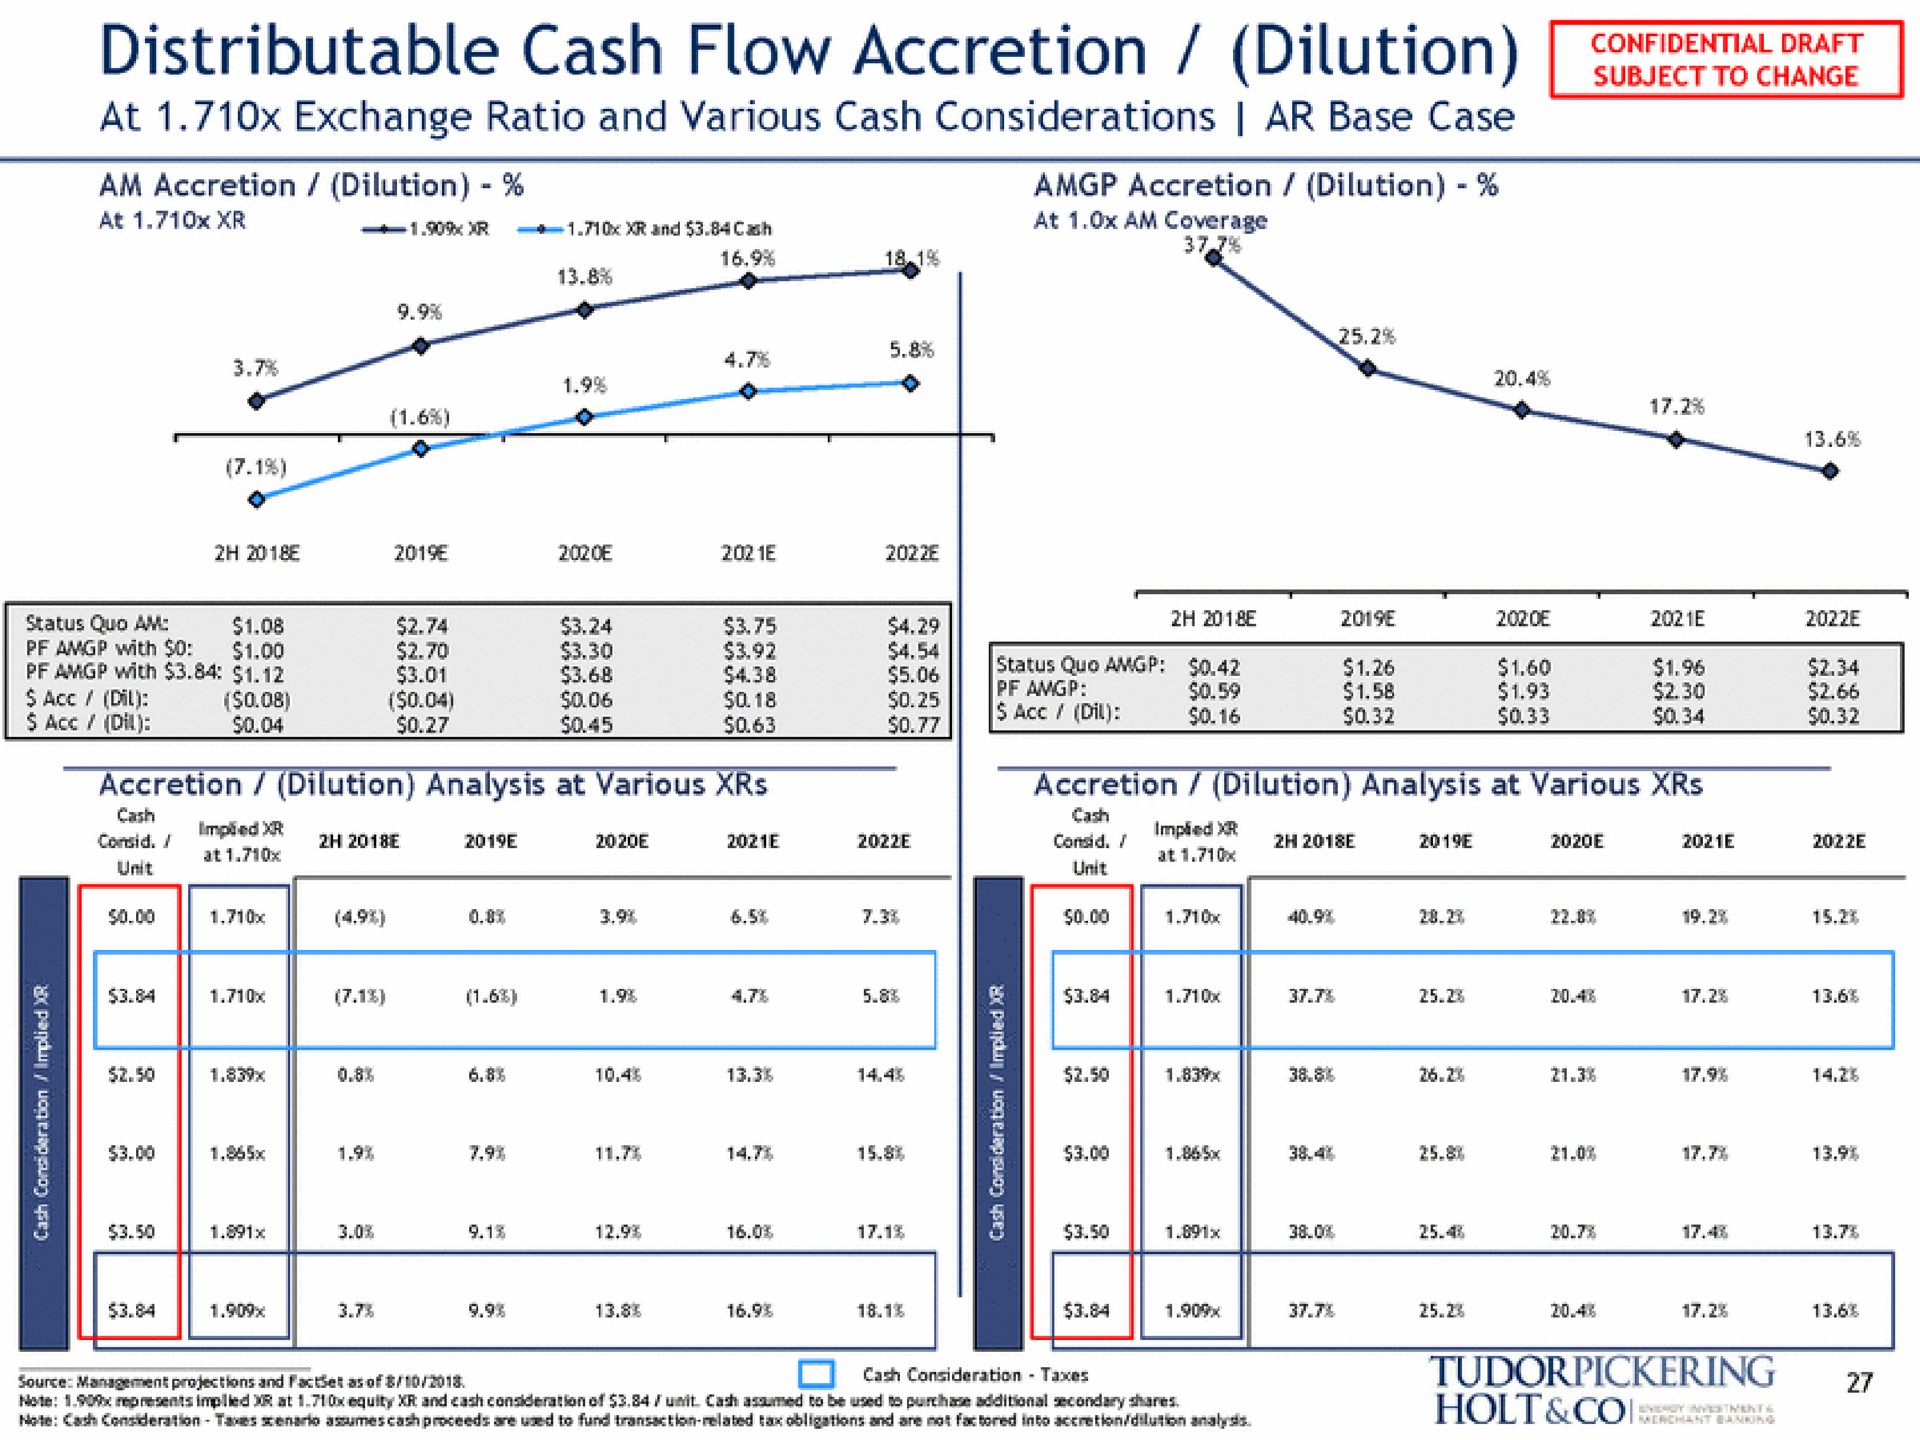 distributable cash flow accretion dilution at exchange ratio and various cash considerations base case cash consideration taxes | Tudor, Pickering, Holt & Co